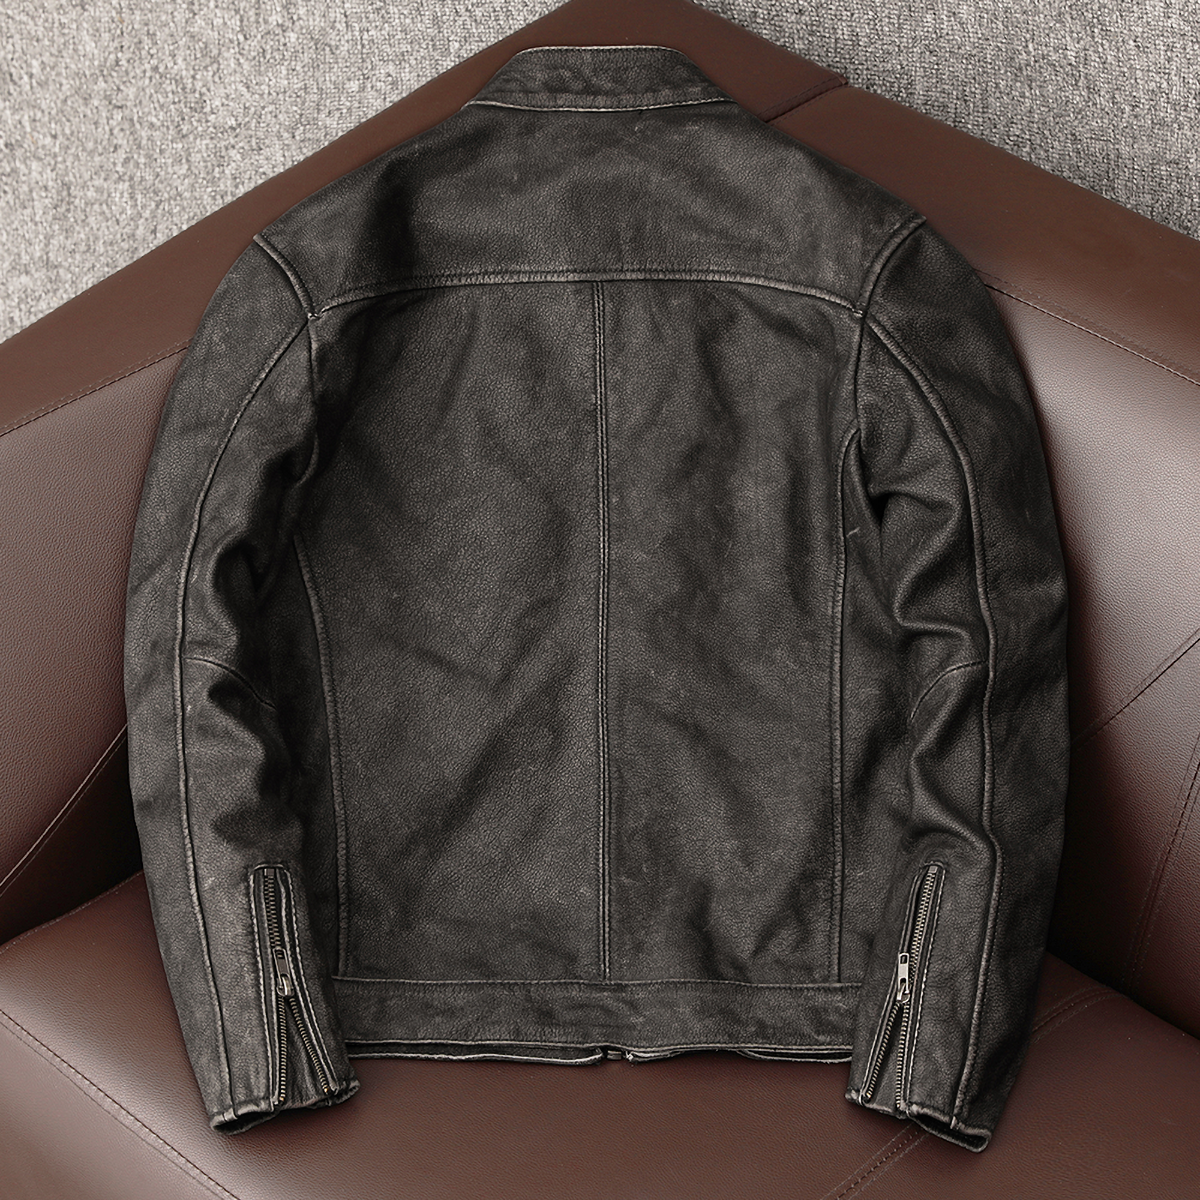 Casual Vintage Motorcycle Leather Jacket